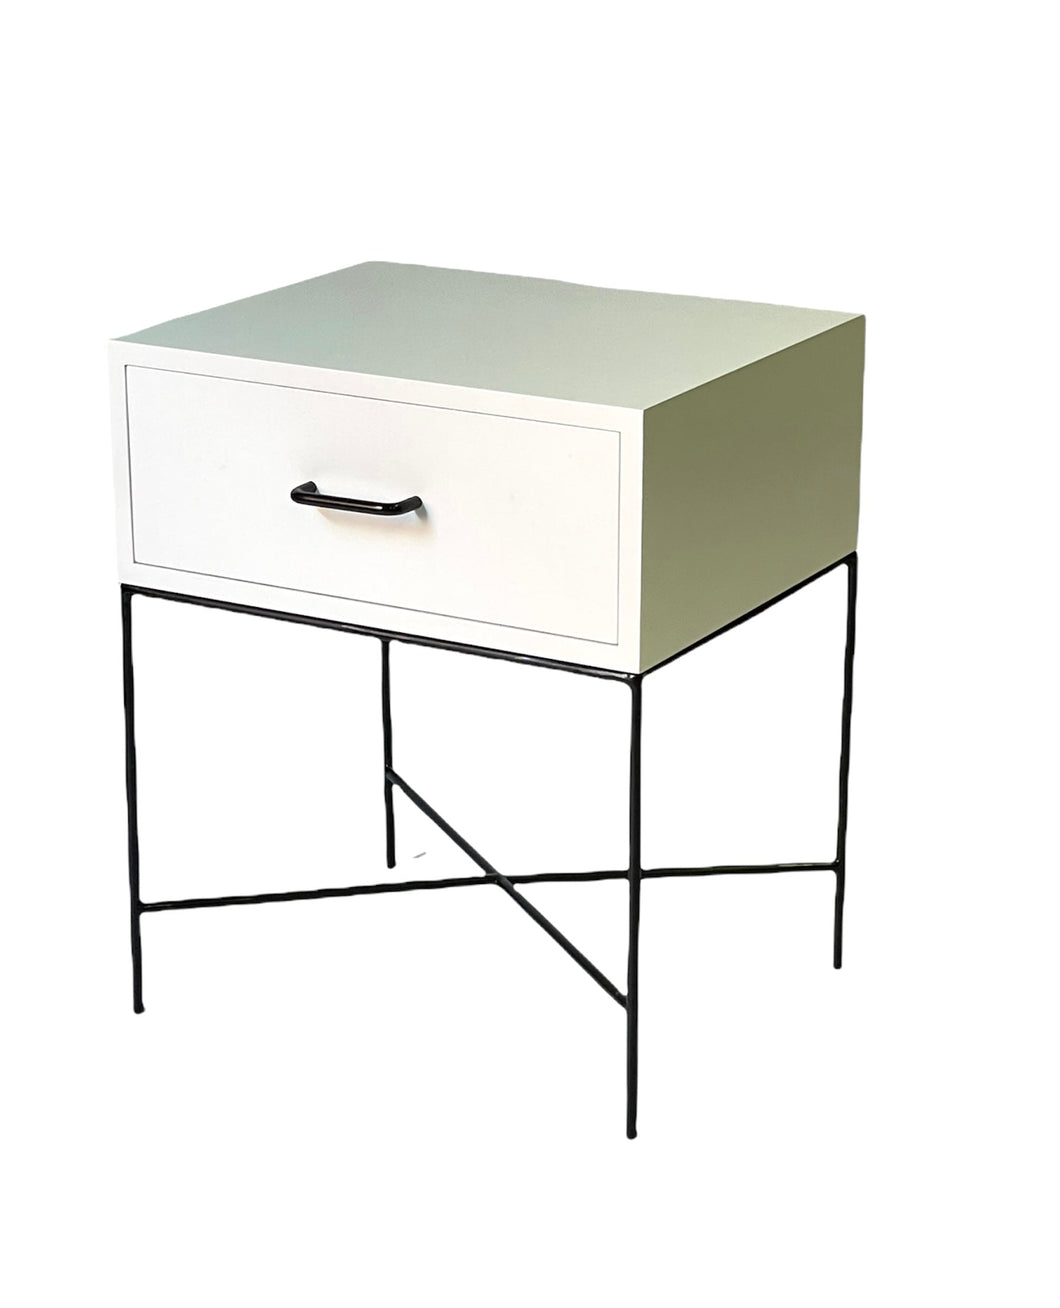 Everest Side Table One Drawer - Round Handles